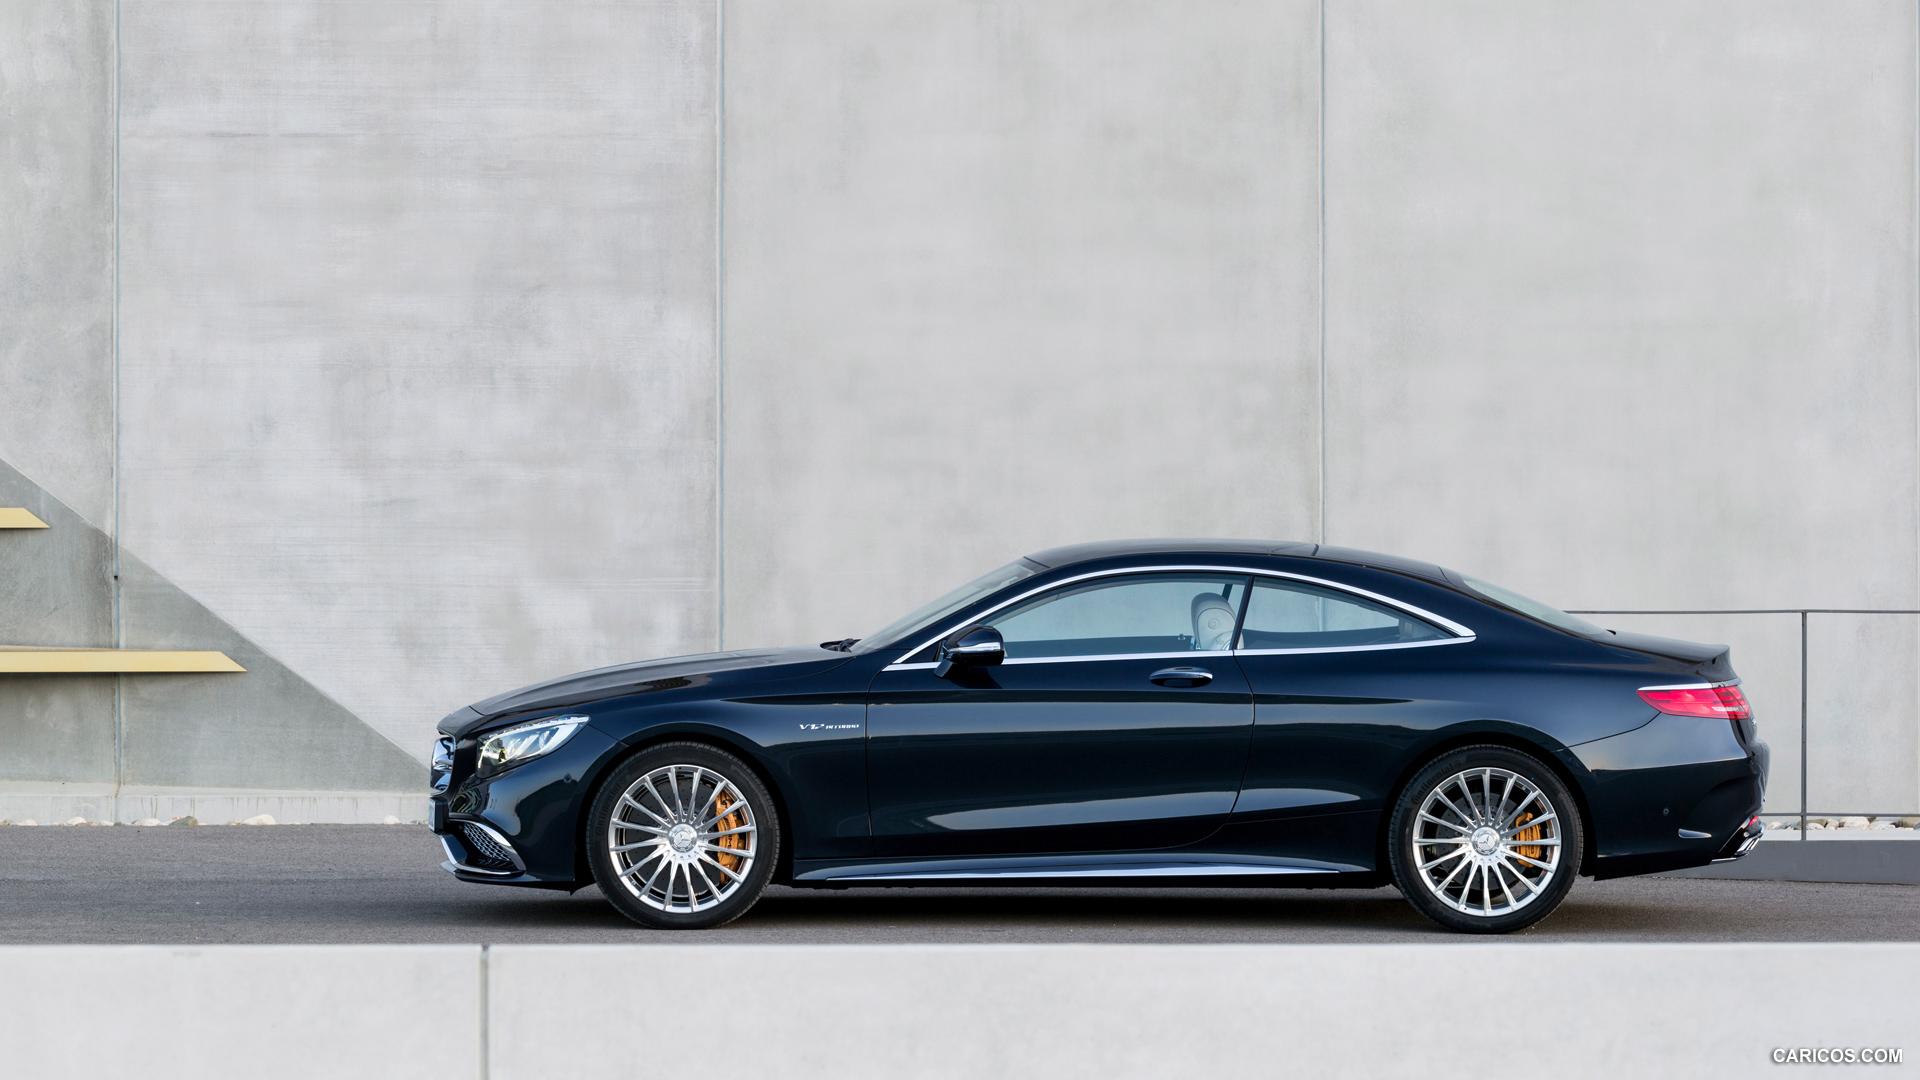 2015 Mercedes-Benz S65 AMG Coupe (Anthracite Blue) - Side, #9 of 101